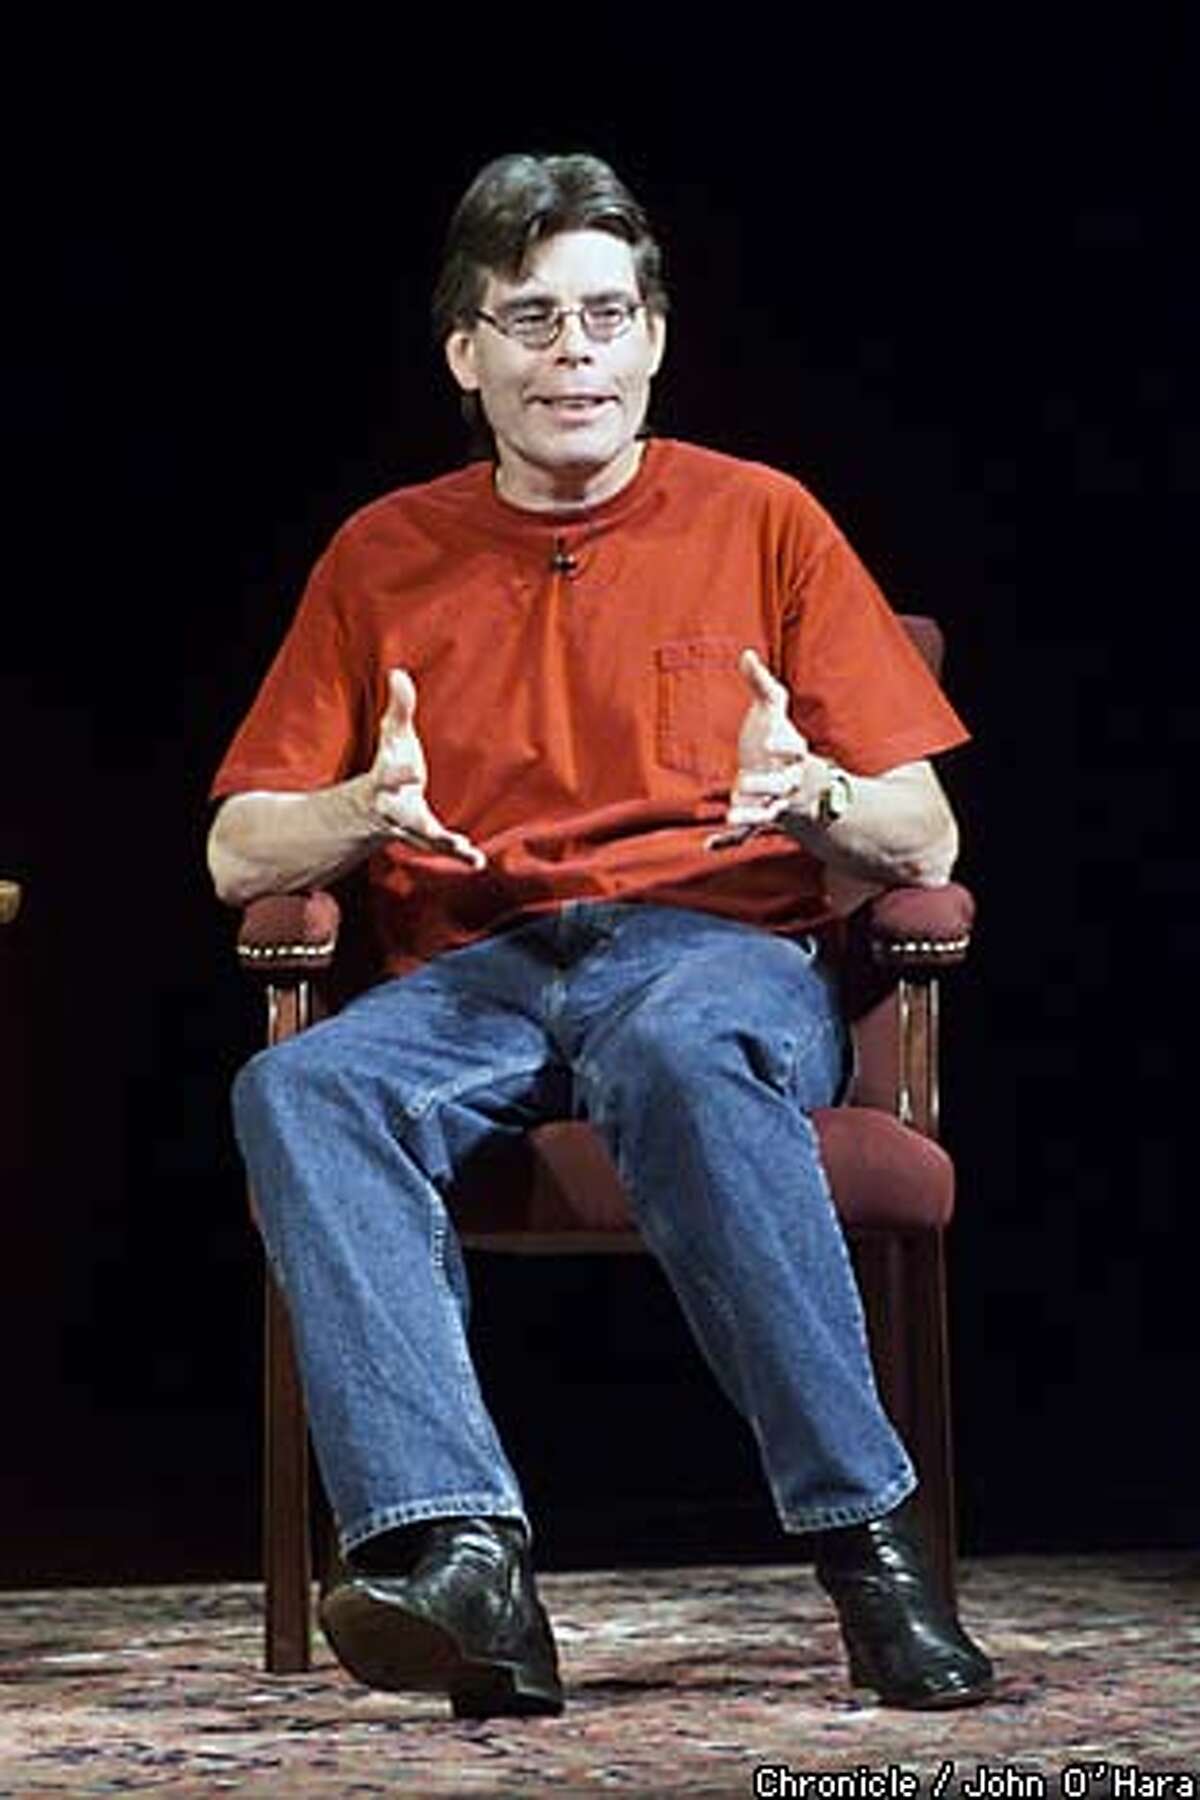 Stephen King gave a lecture about writing at Herbst Theatre in 2000, the year after he was hit by a minivan. Chronicle photo by John O'Hara